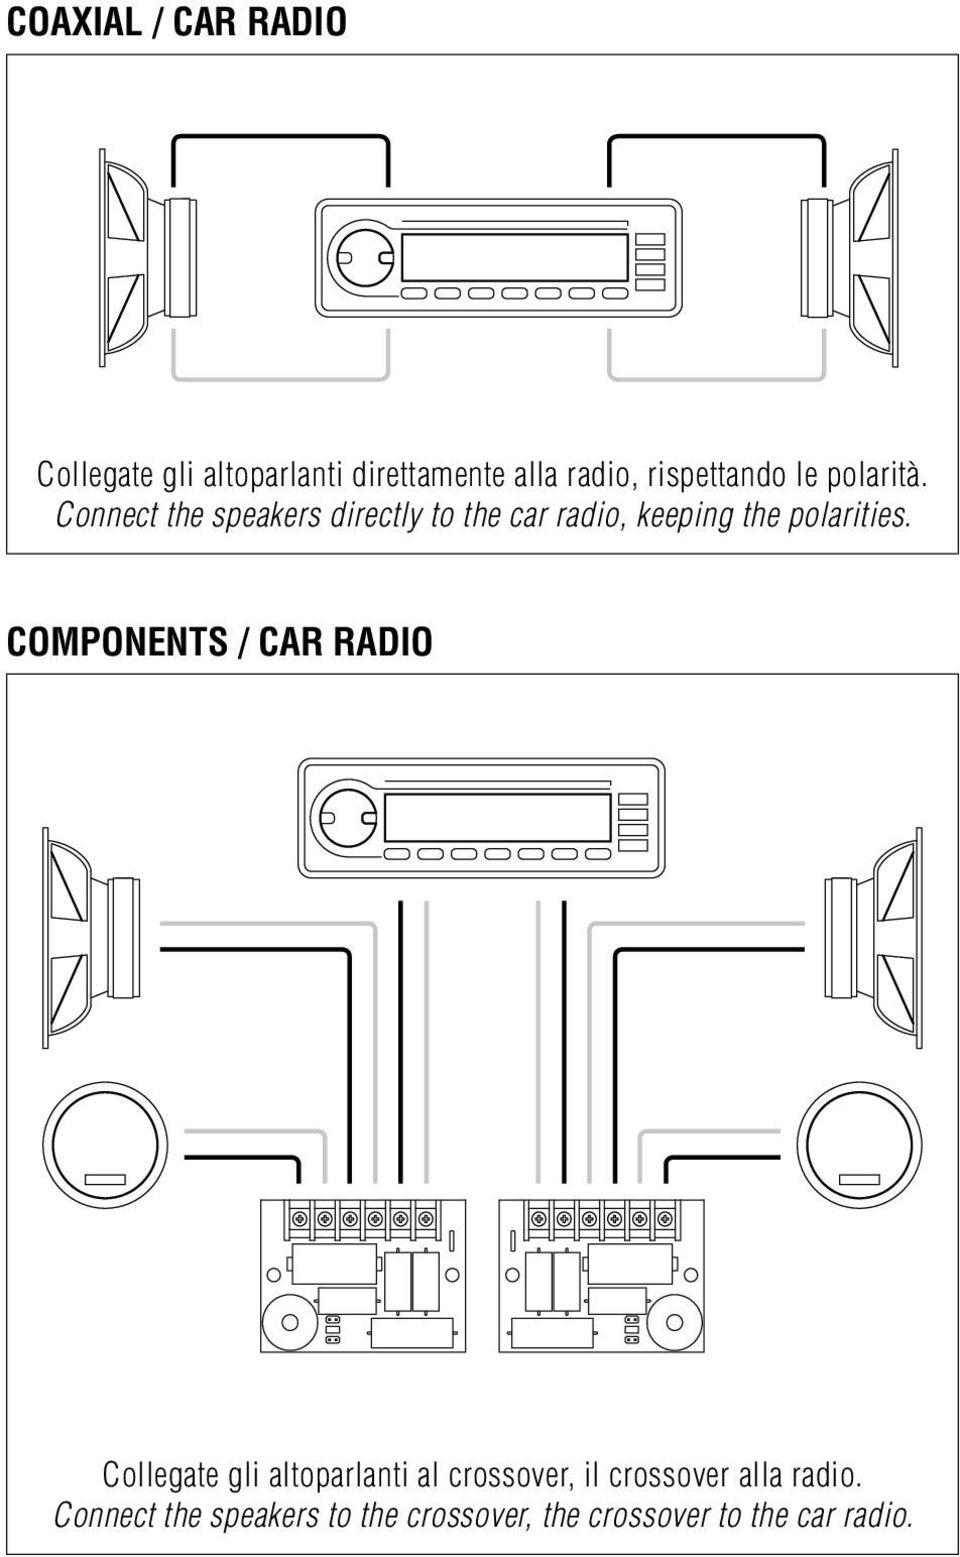 Connect the speakers directly to the car radio, keeping the polarities.